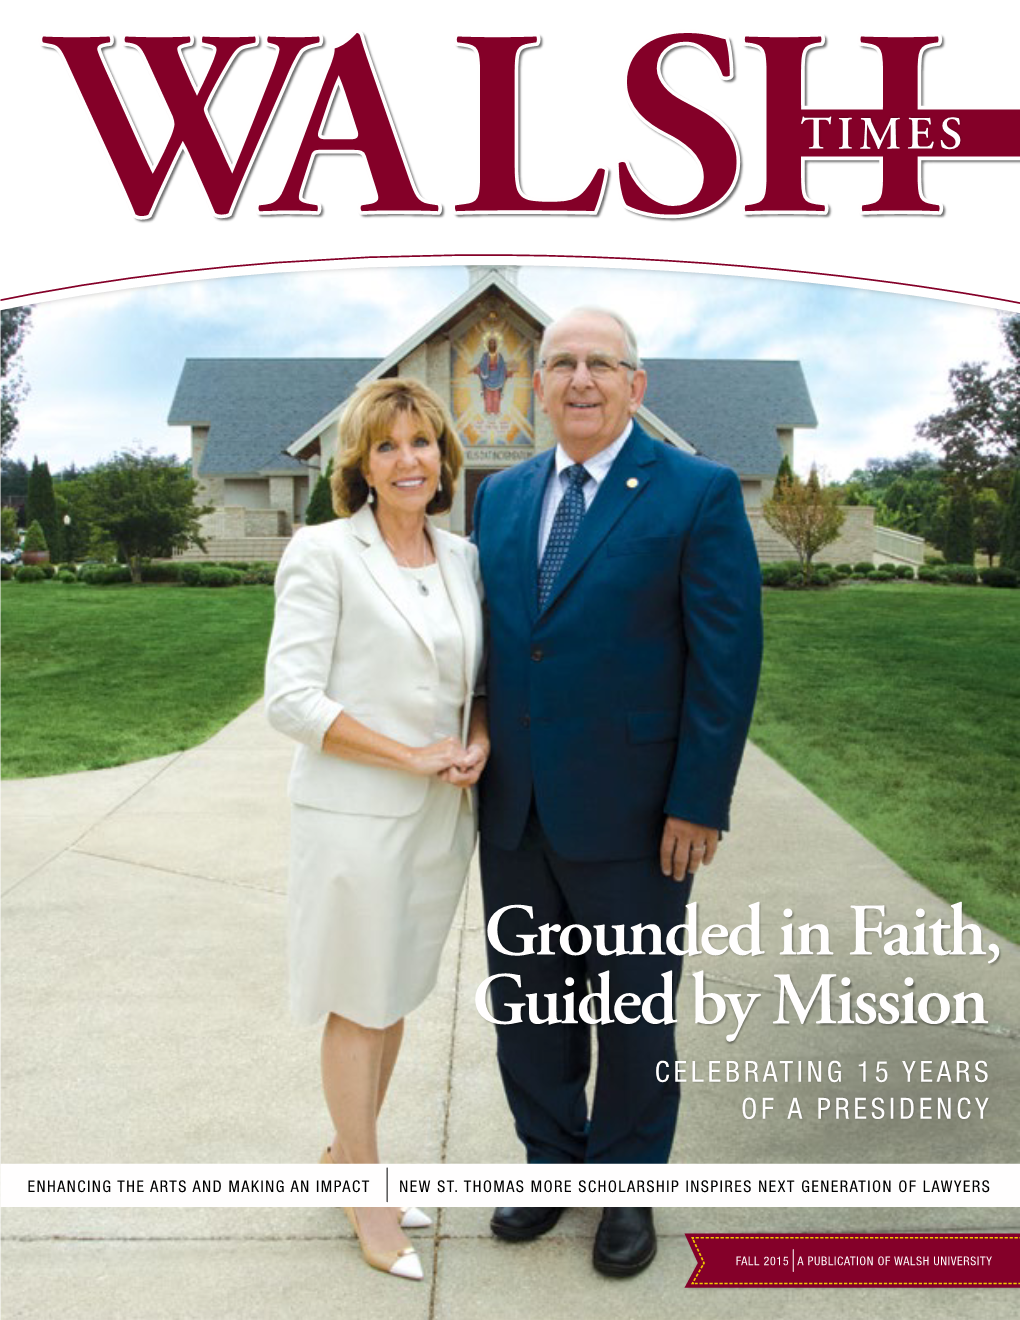 Grounded in Faith, Guided by Mission CELEBRATING 15 YEARS of a PRESIDENCY